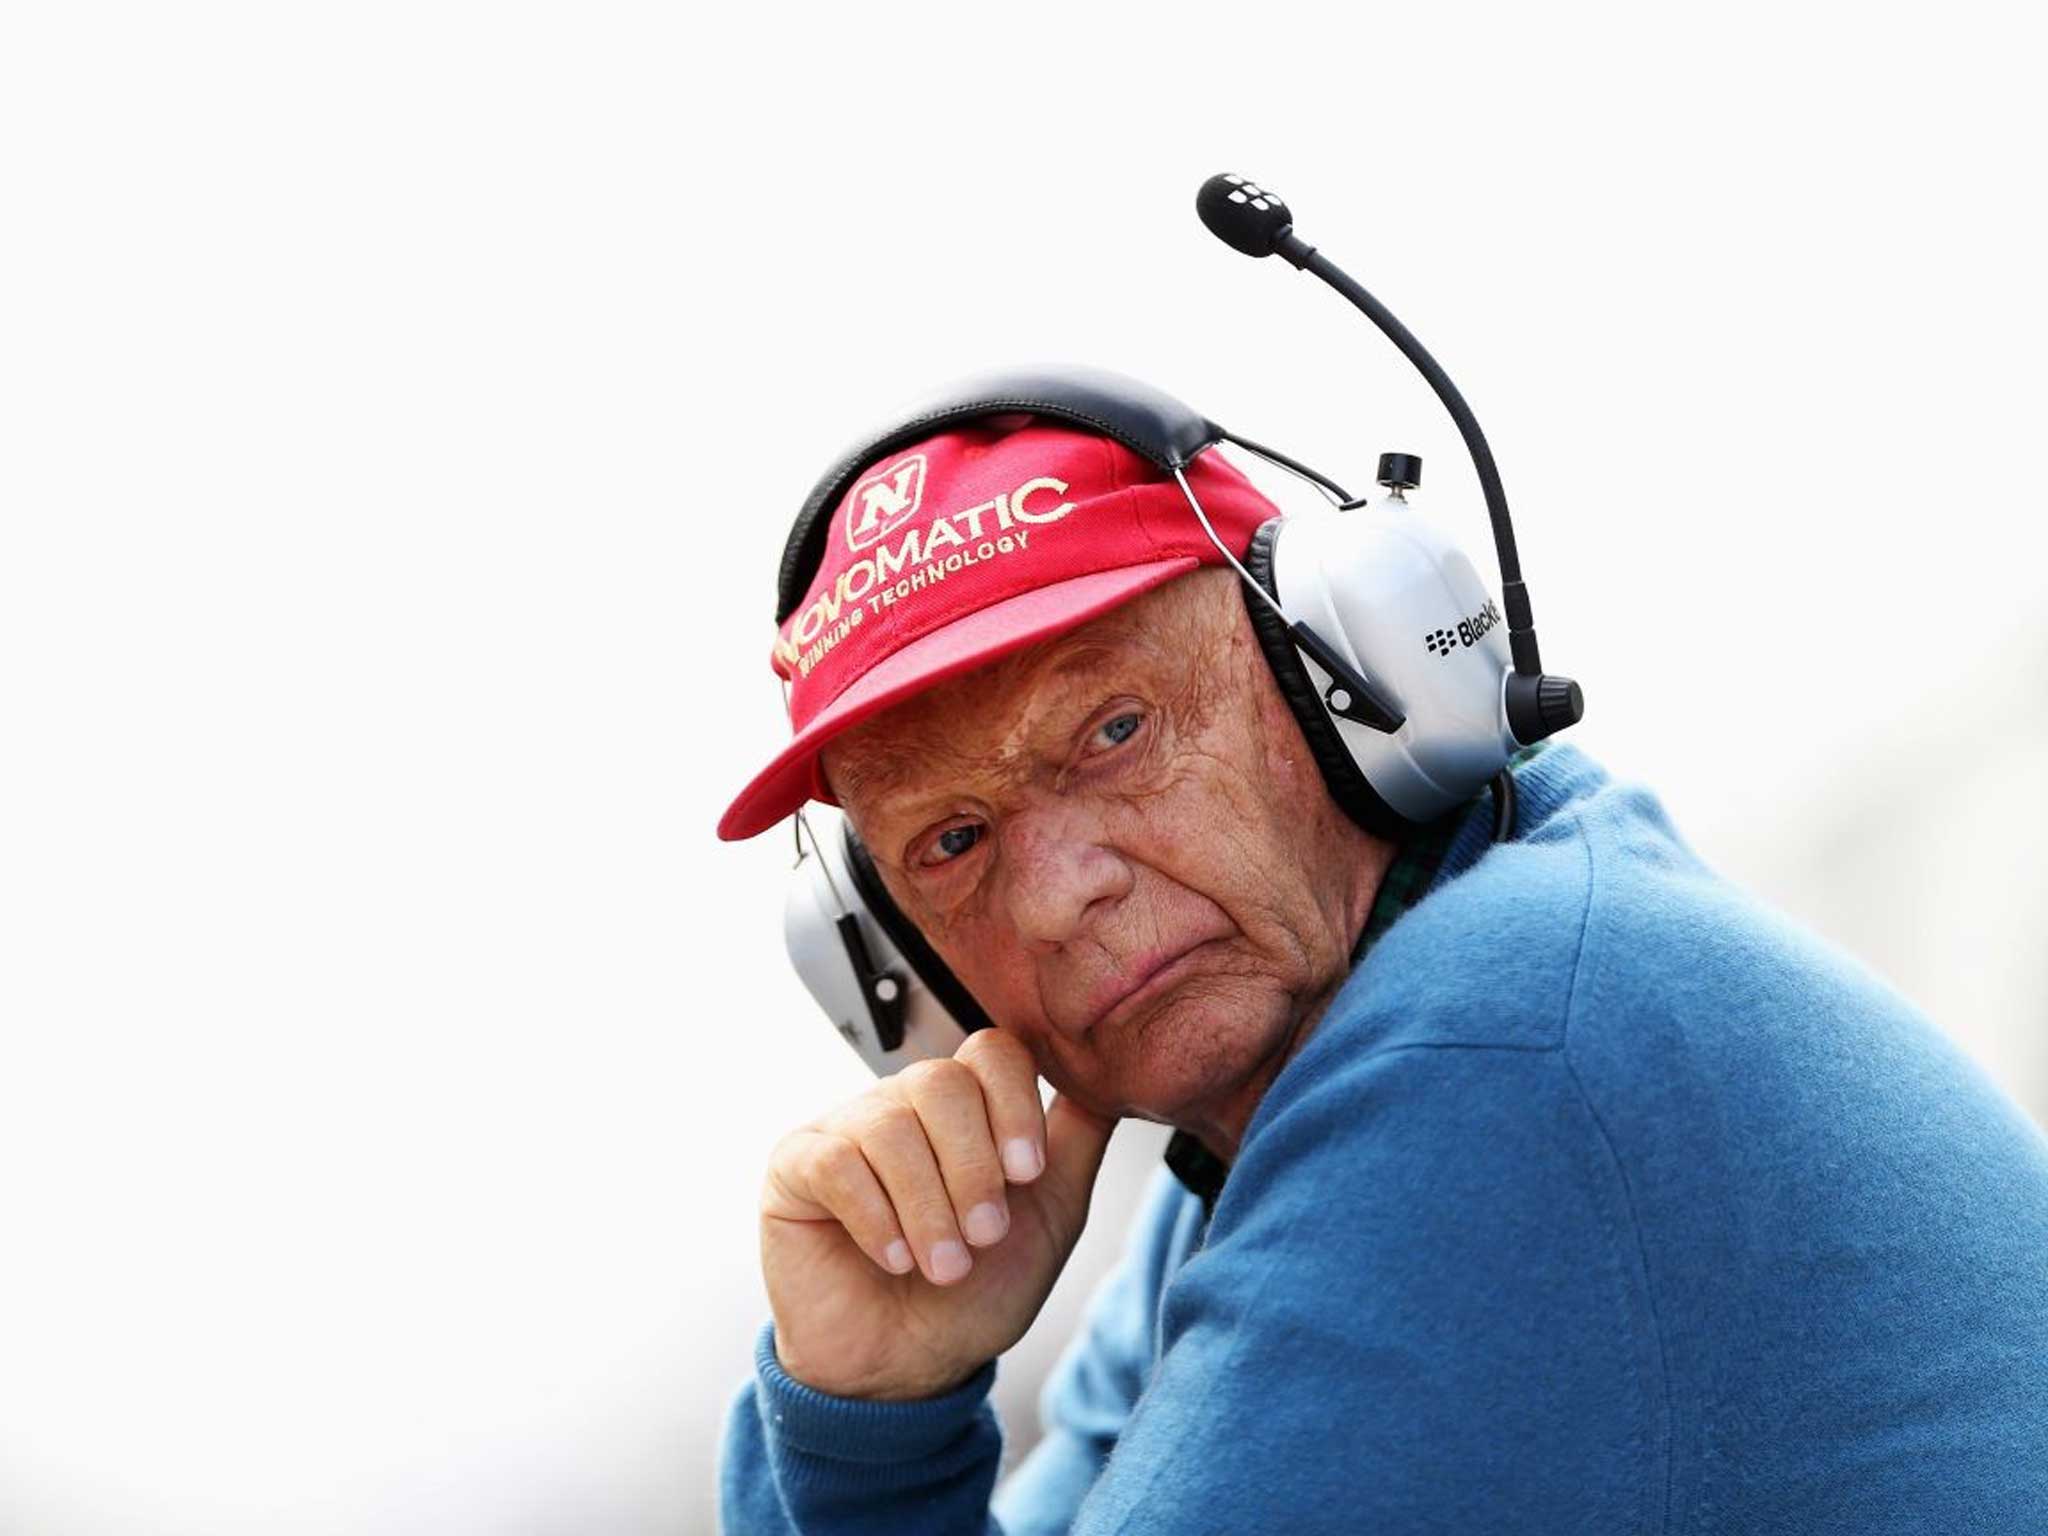 A big noise: As chairman of Mercedes F1 and a former world champion, Niki Lauda is perfectly placed to challenge the conventional